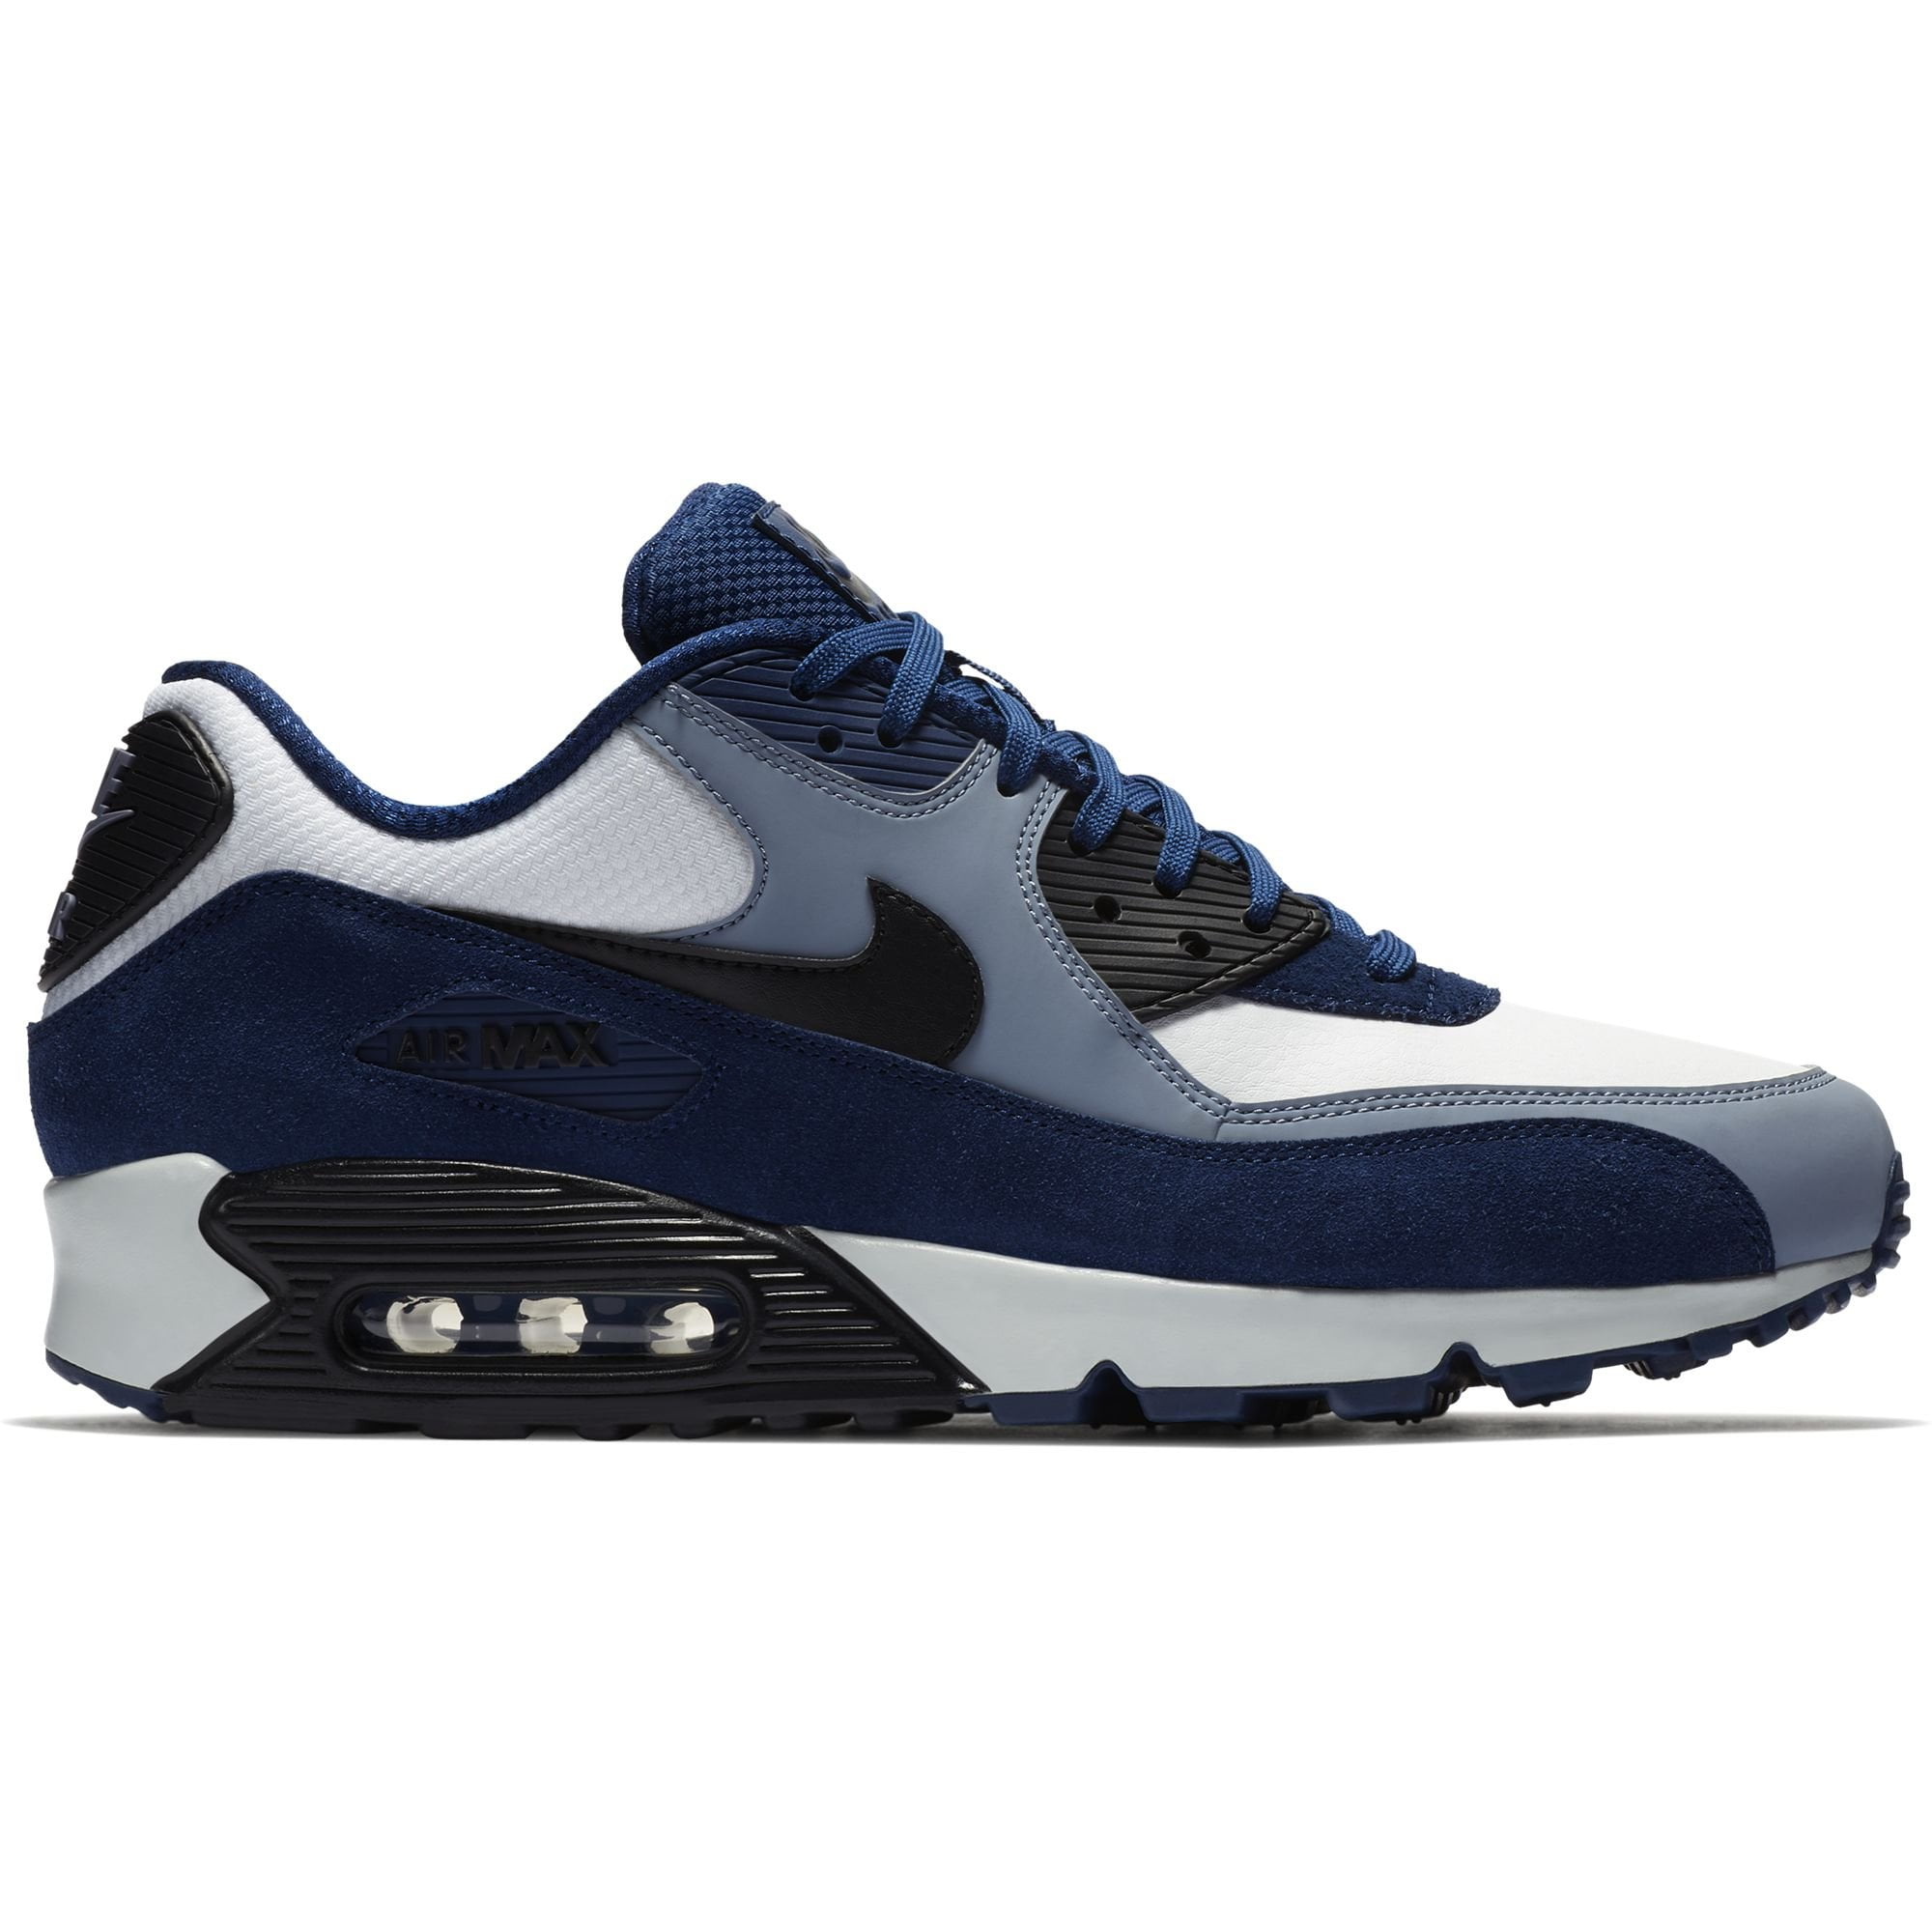 nike air max 90 leather men's shoe